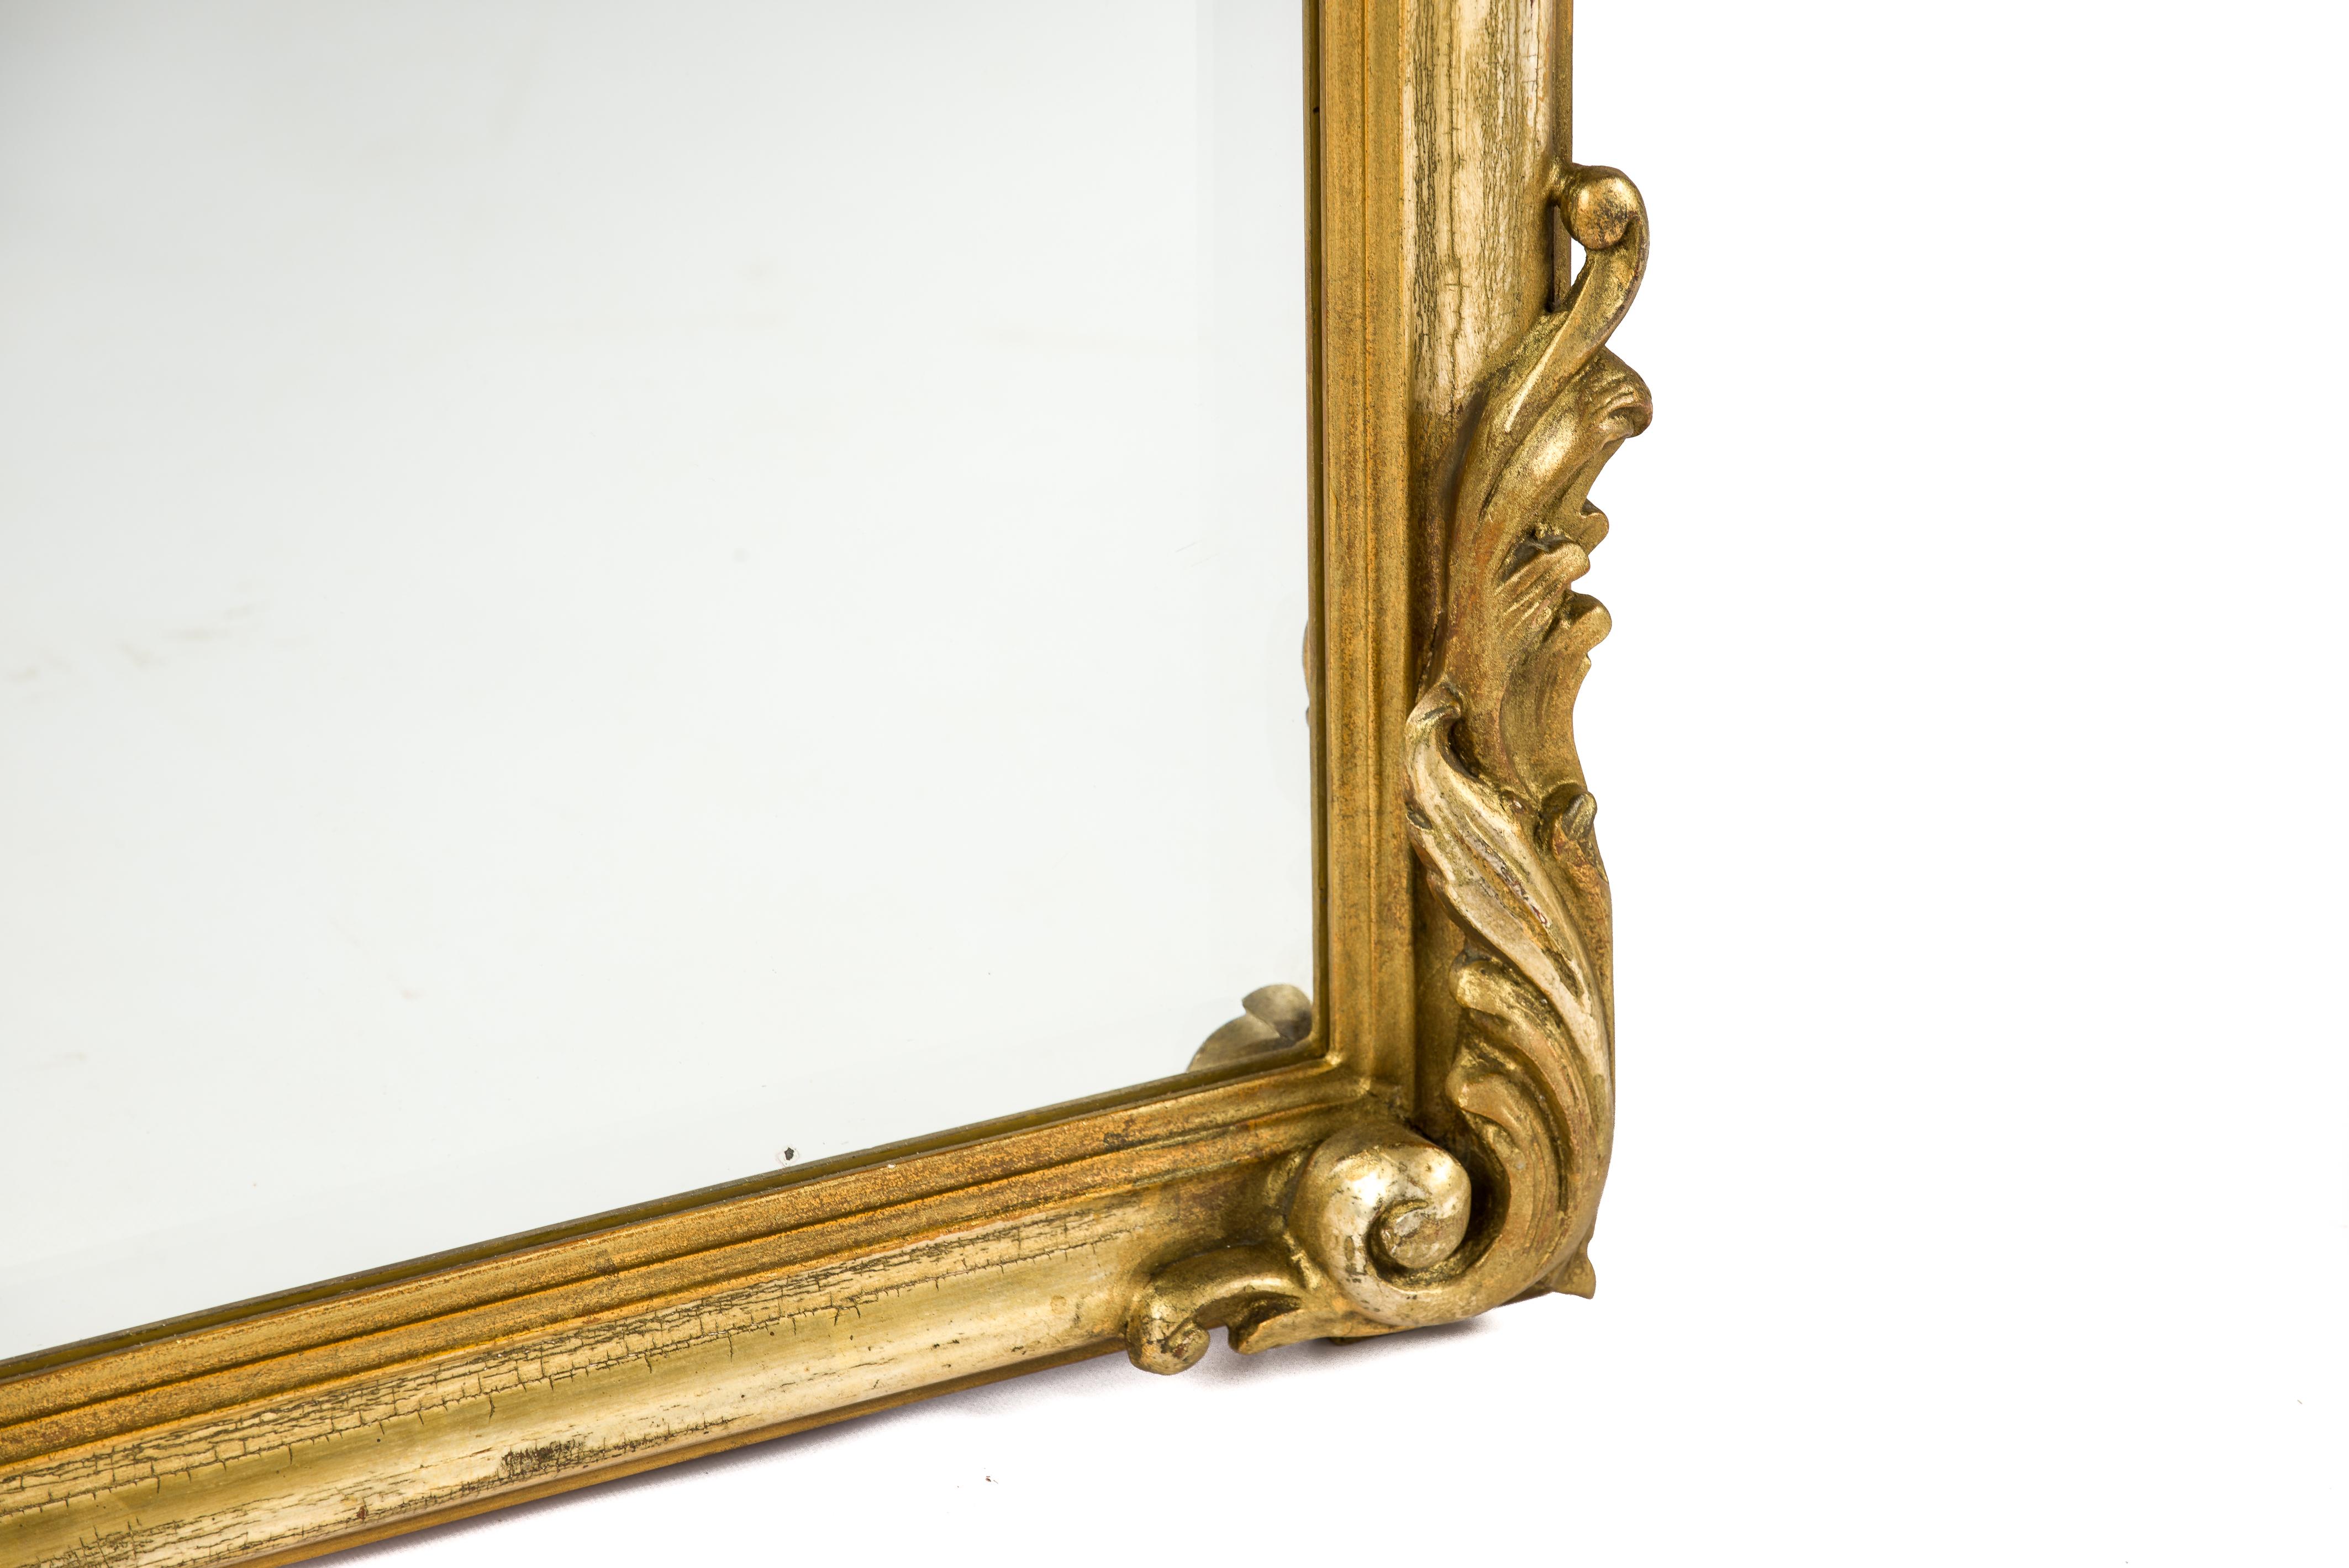 Patinated Antique 19th century French Louis Quinze Gold Gilt Mirror with Facetted Glass For Sale